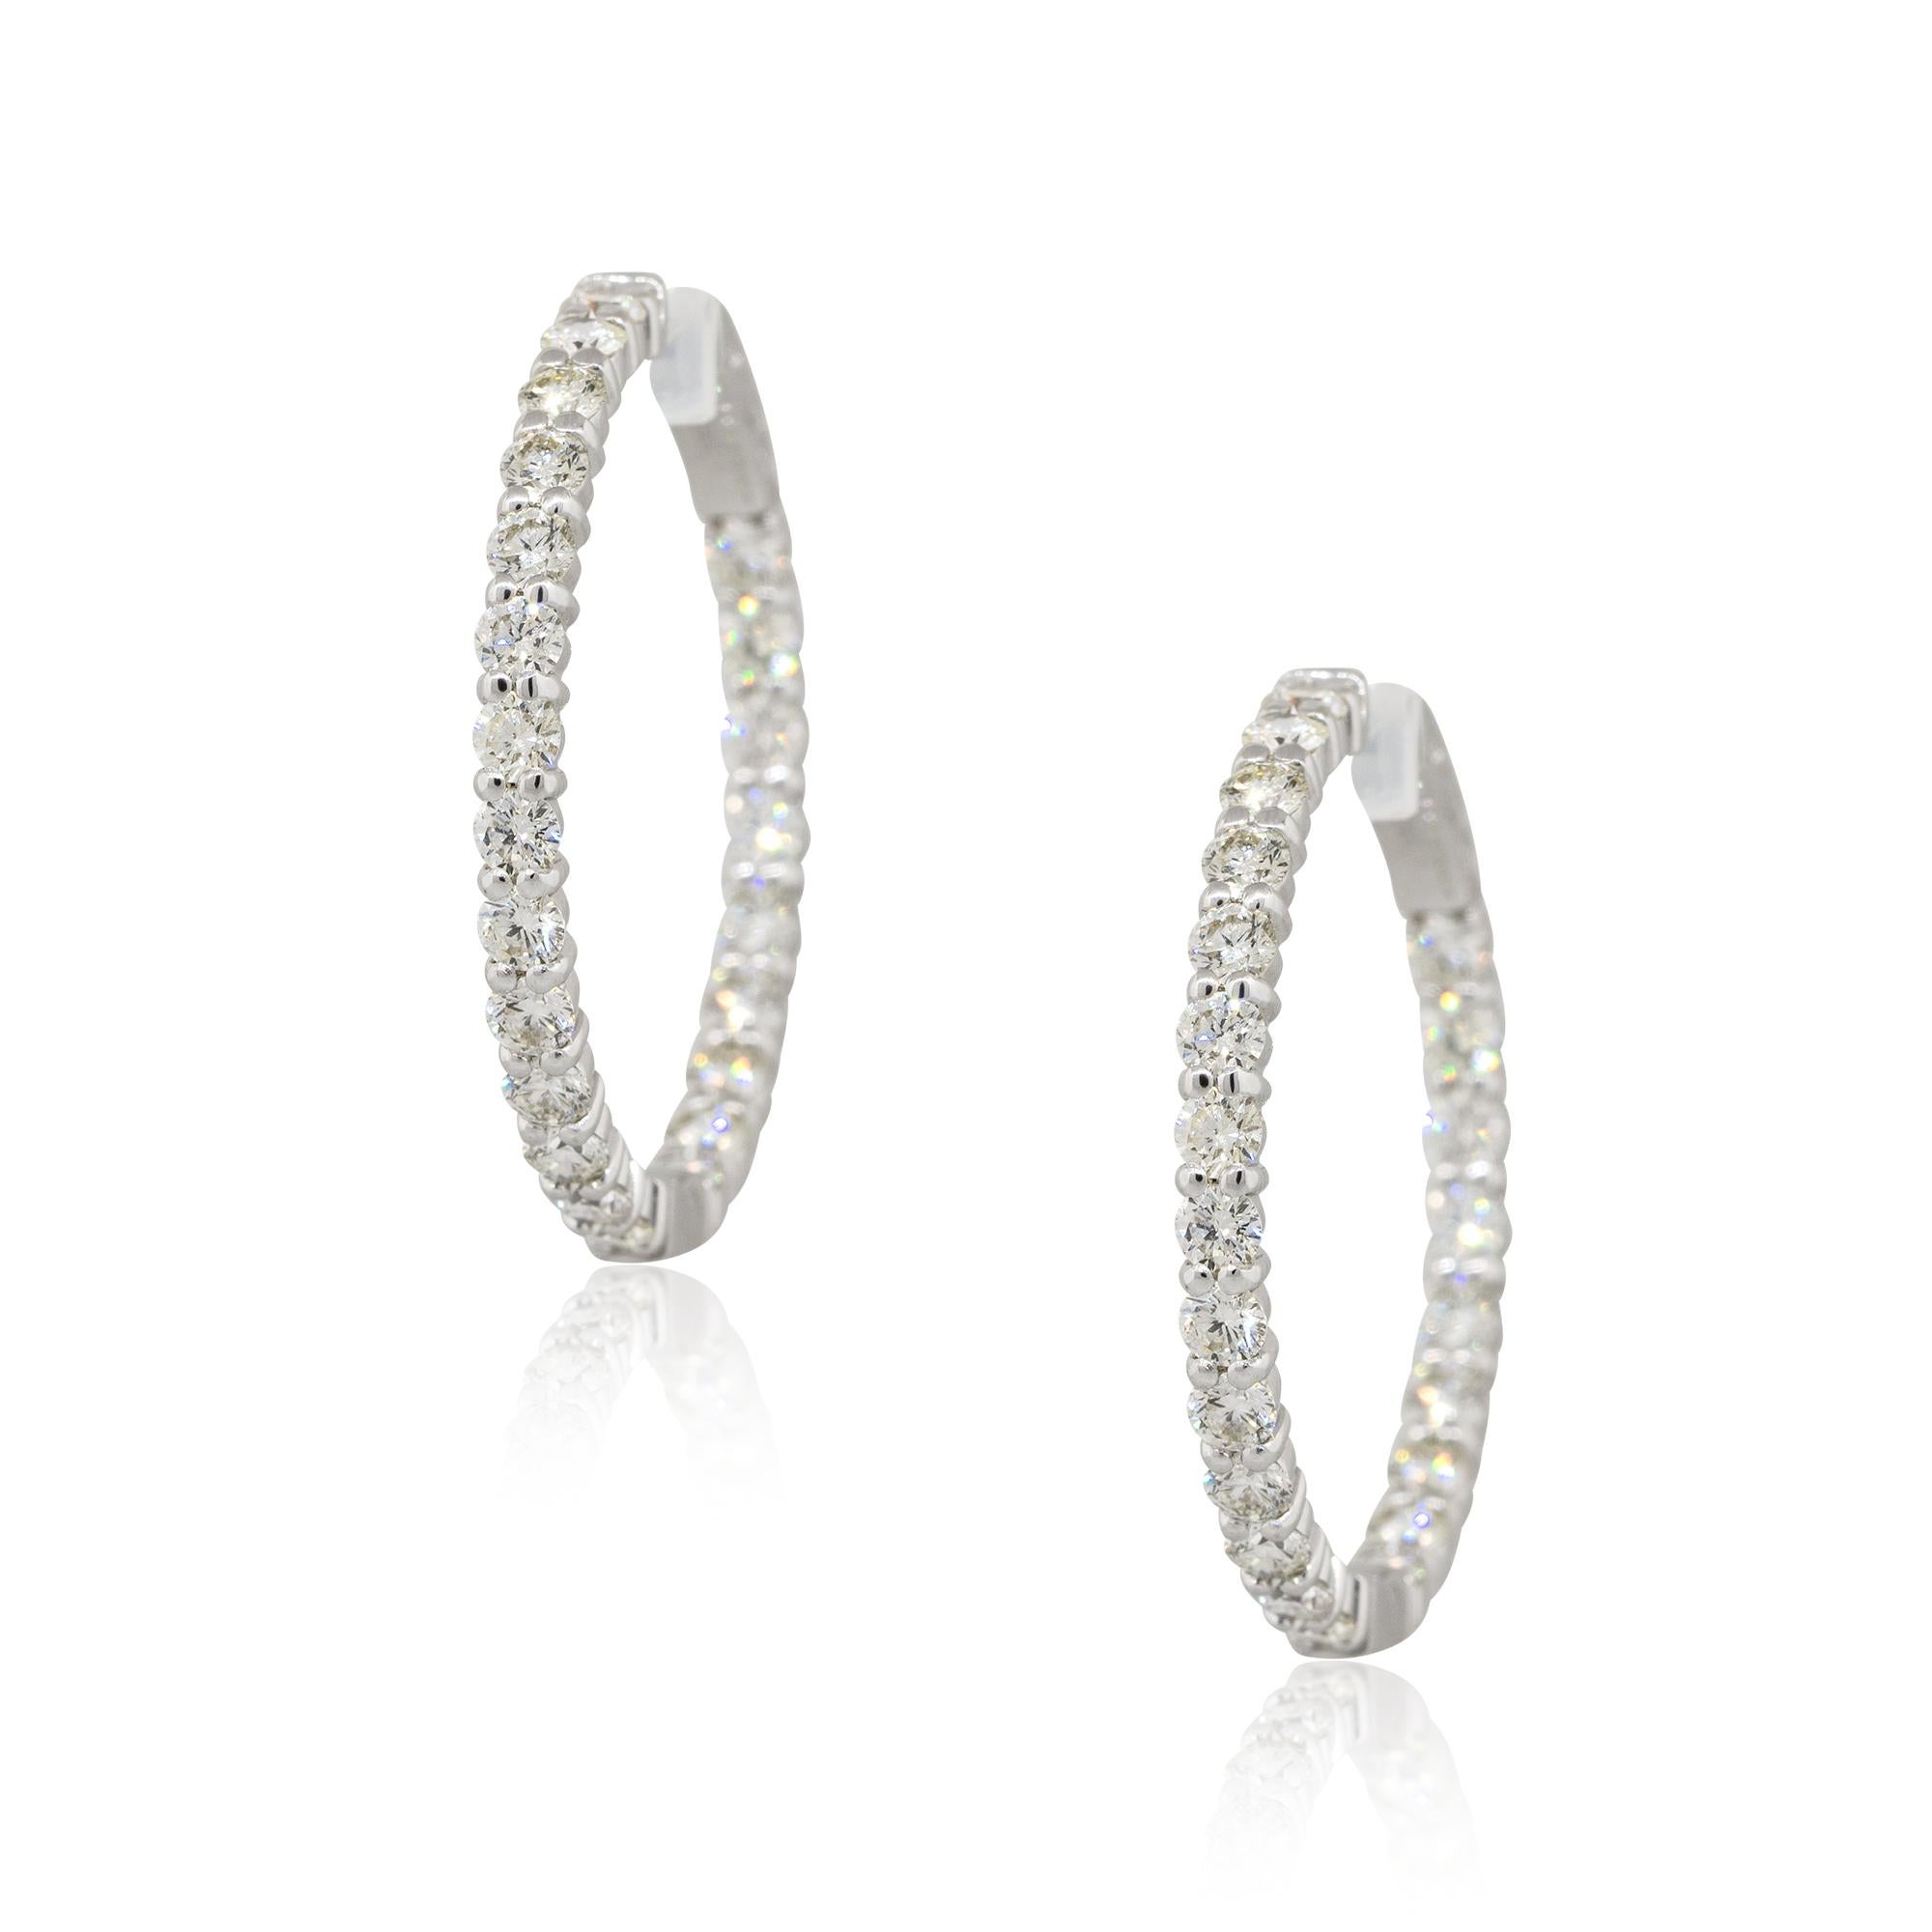 Material: 14k White Gold
Diamond Details: Approx. 3.50ct of round cut diamonds. Diamonds are G/H in color and VS in clarity. 46 stones 
Earring Measurements: 30.60mm x 30.45mm x 2.80mm
Total Weight: 8.2g (5.2dwt) 
Earring backs: Hinged